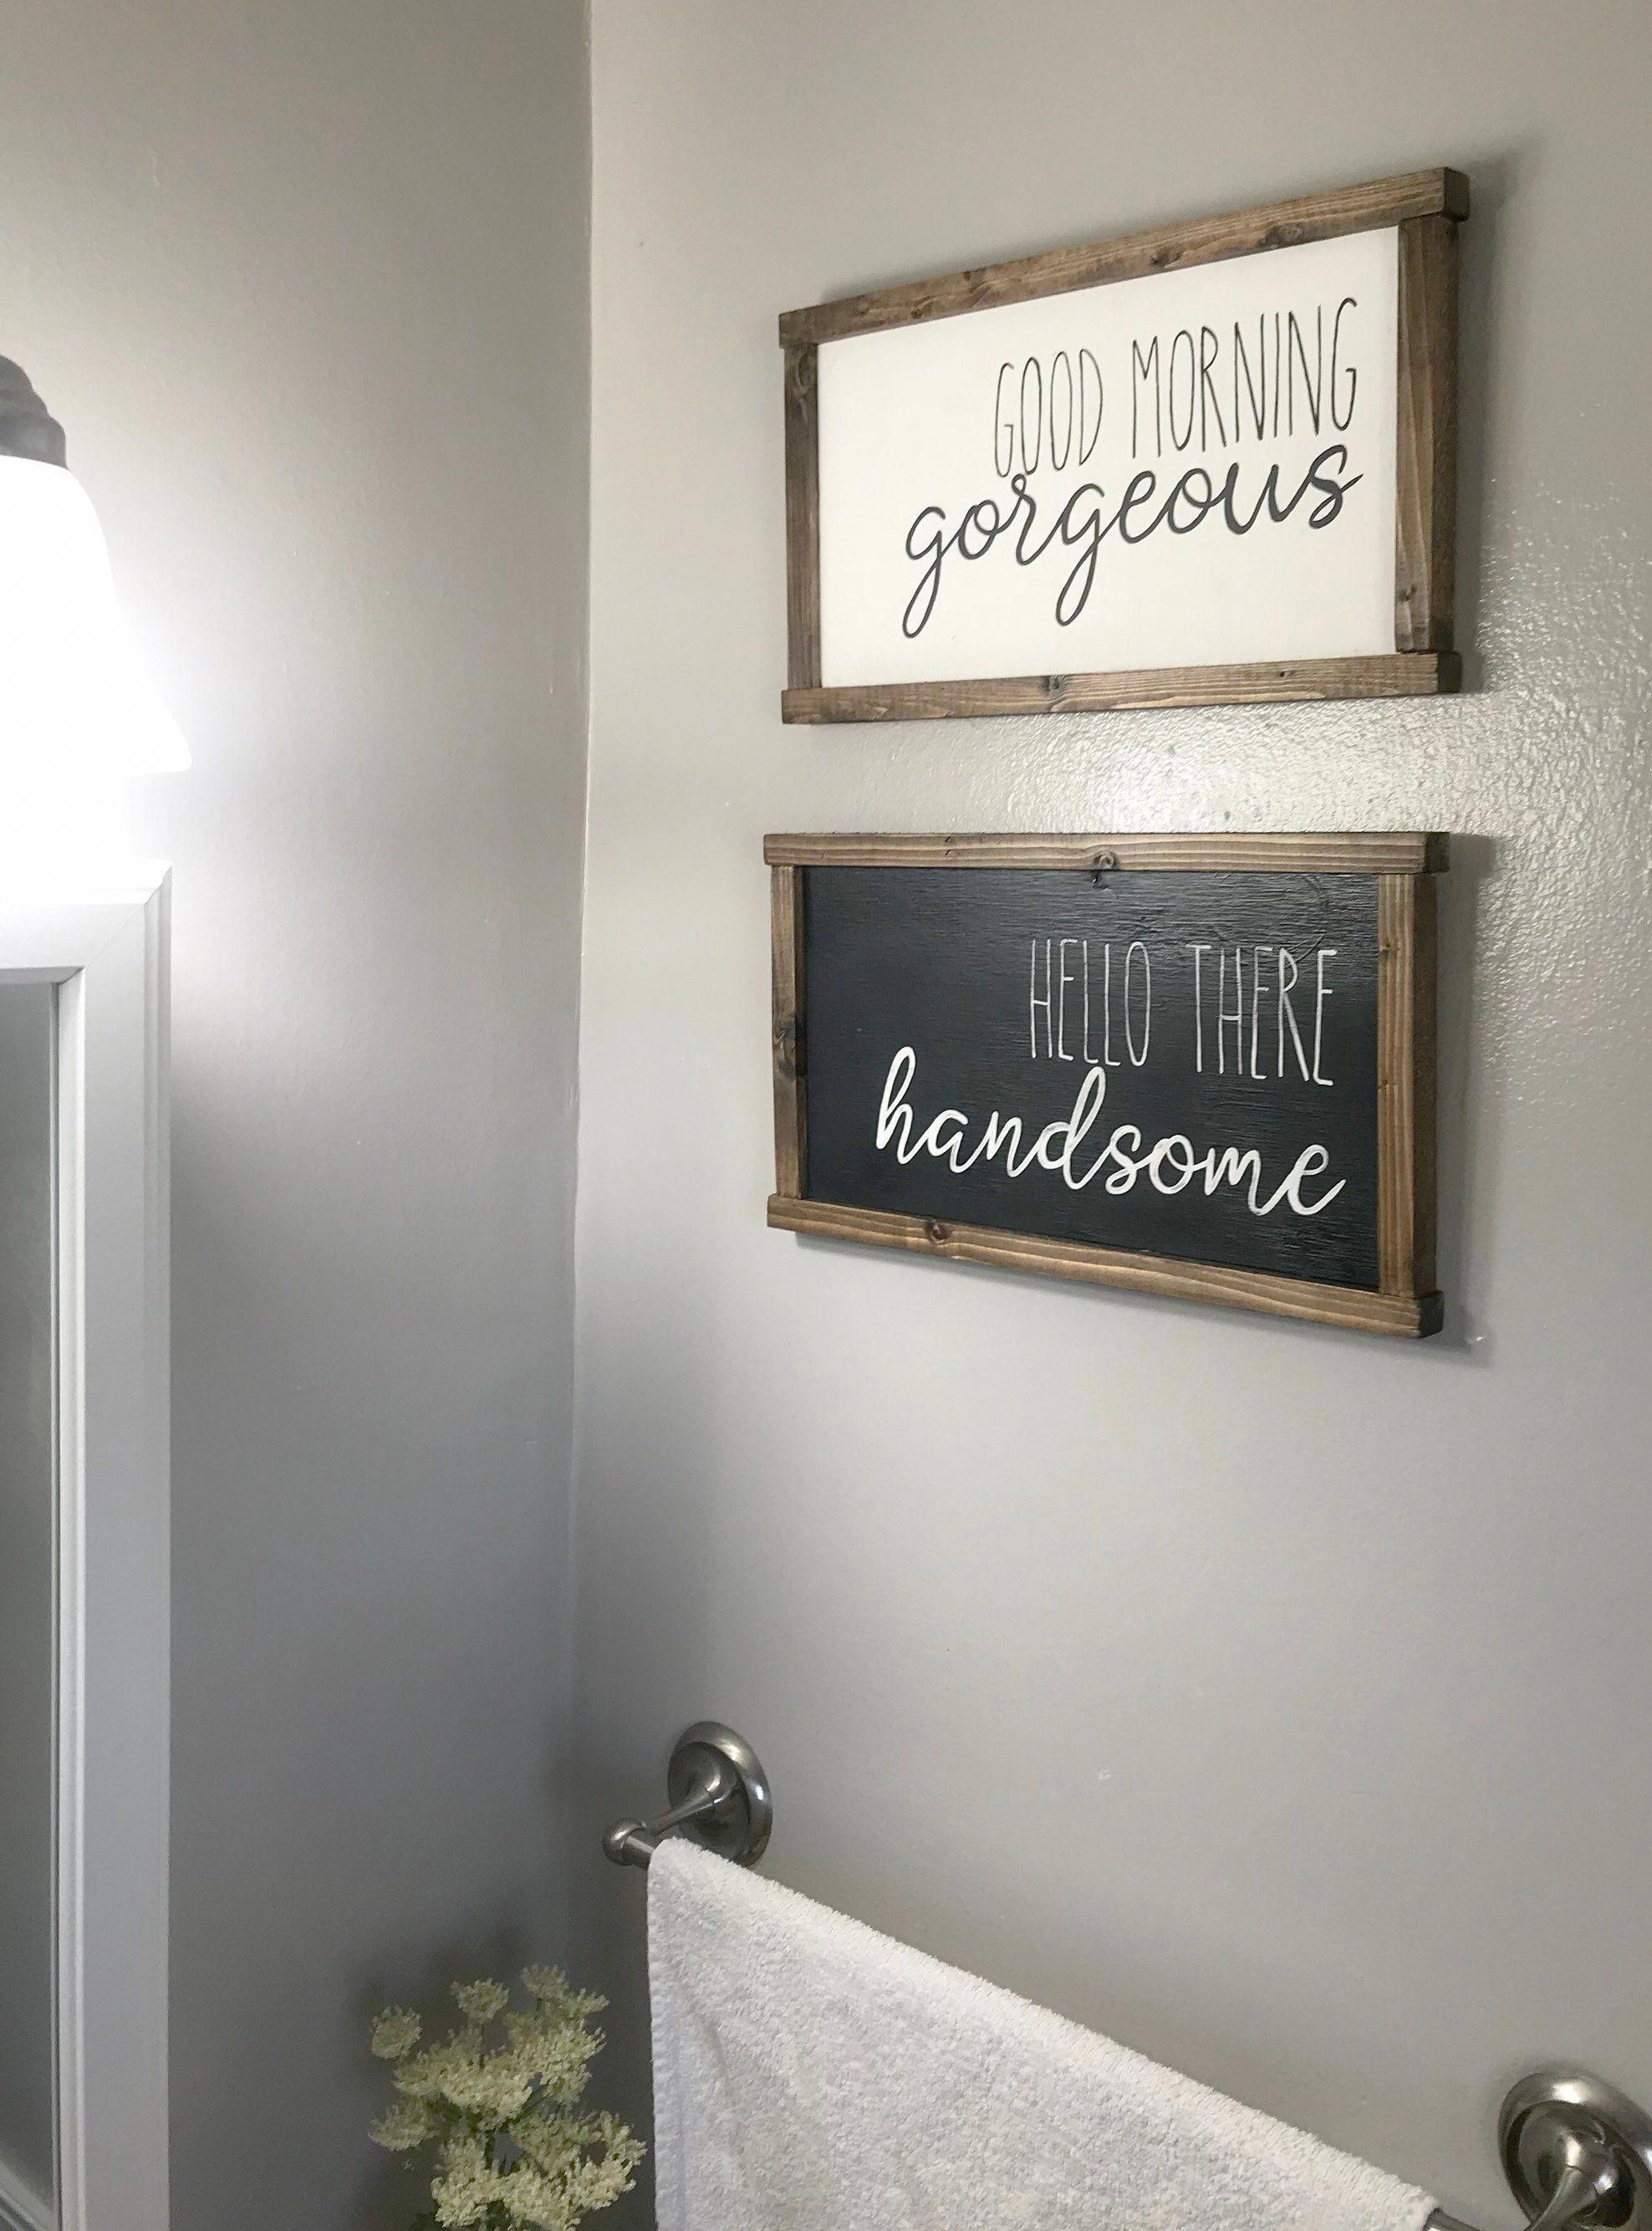 Good morning gorgeous | Hello there handsome | master bedroom decor | master bedroom signs | bathroom signs | bathroom decor | farmhouse -   diy Bedroom signs